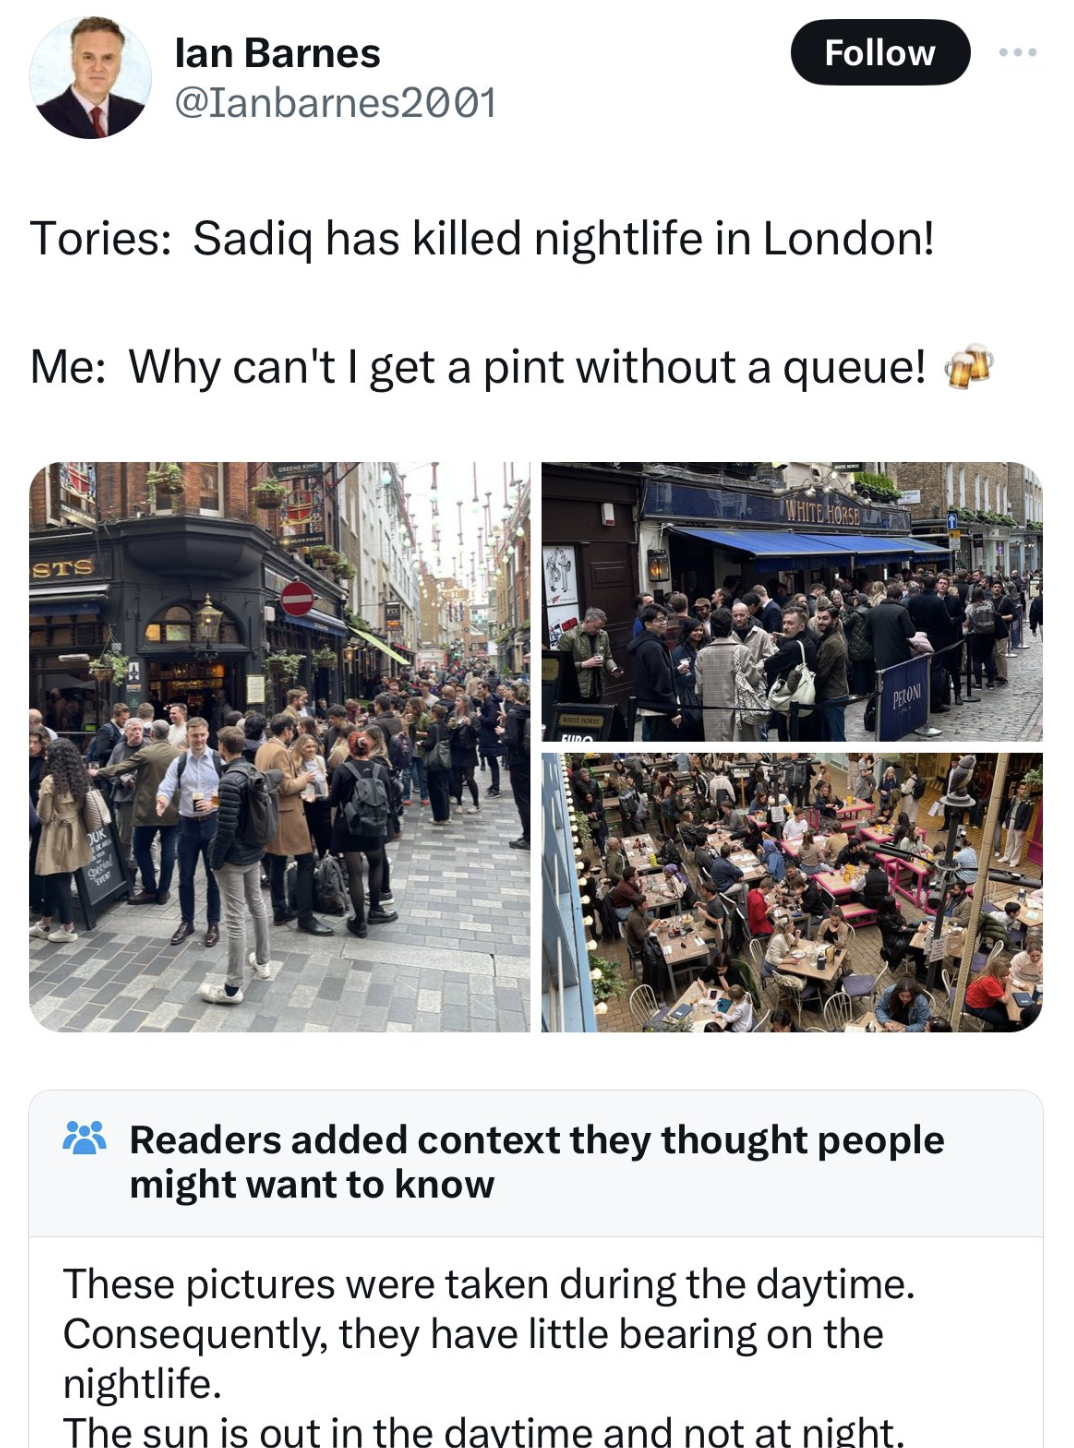 crowd - lan Barnes Tories Sadiq has killed nightlife in London! Me Why can't I get a pint without a queue! Readers added context they thought people might want to know These pictures were taken during the daytime. Consequently, they have little bearing on